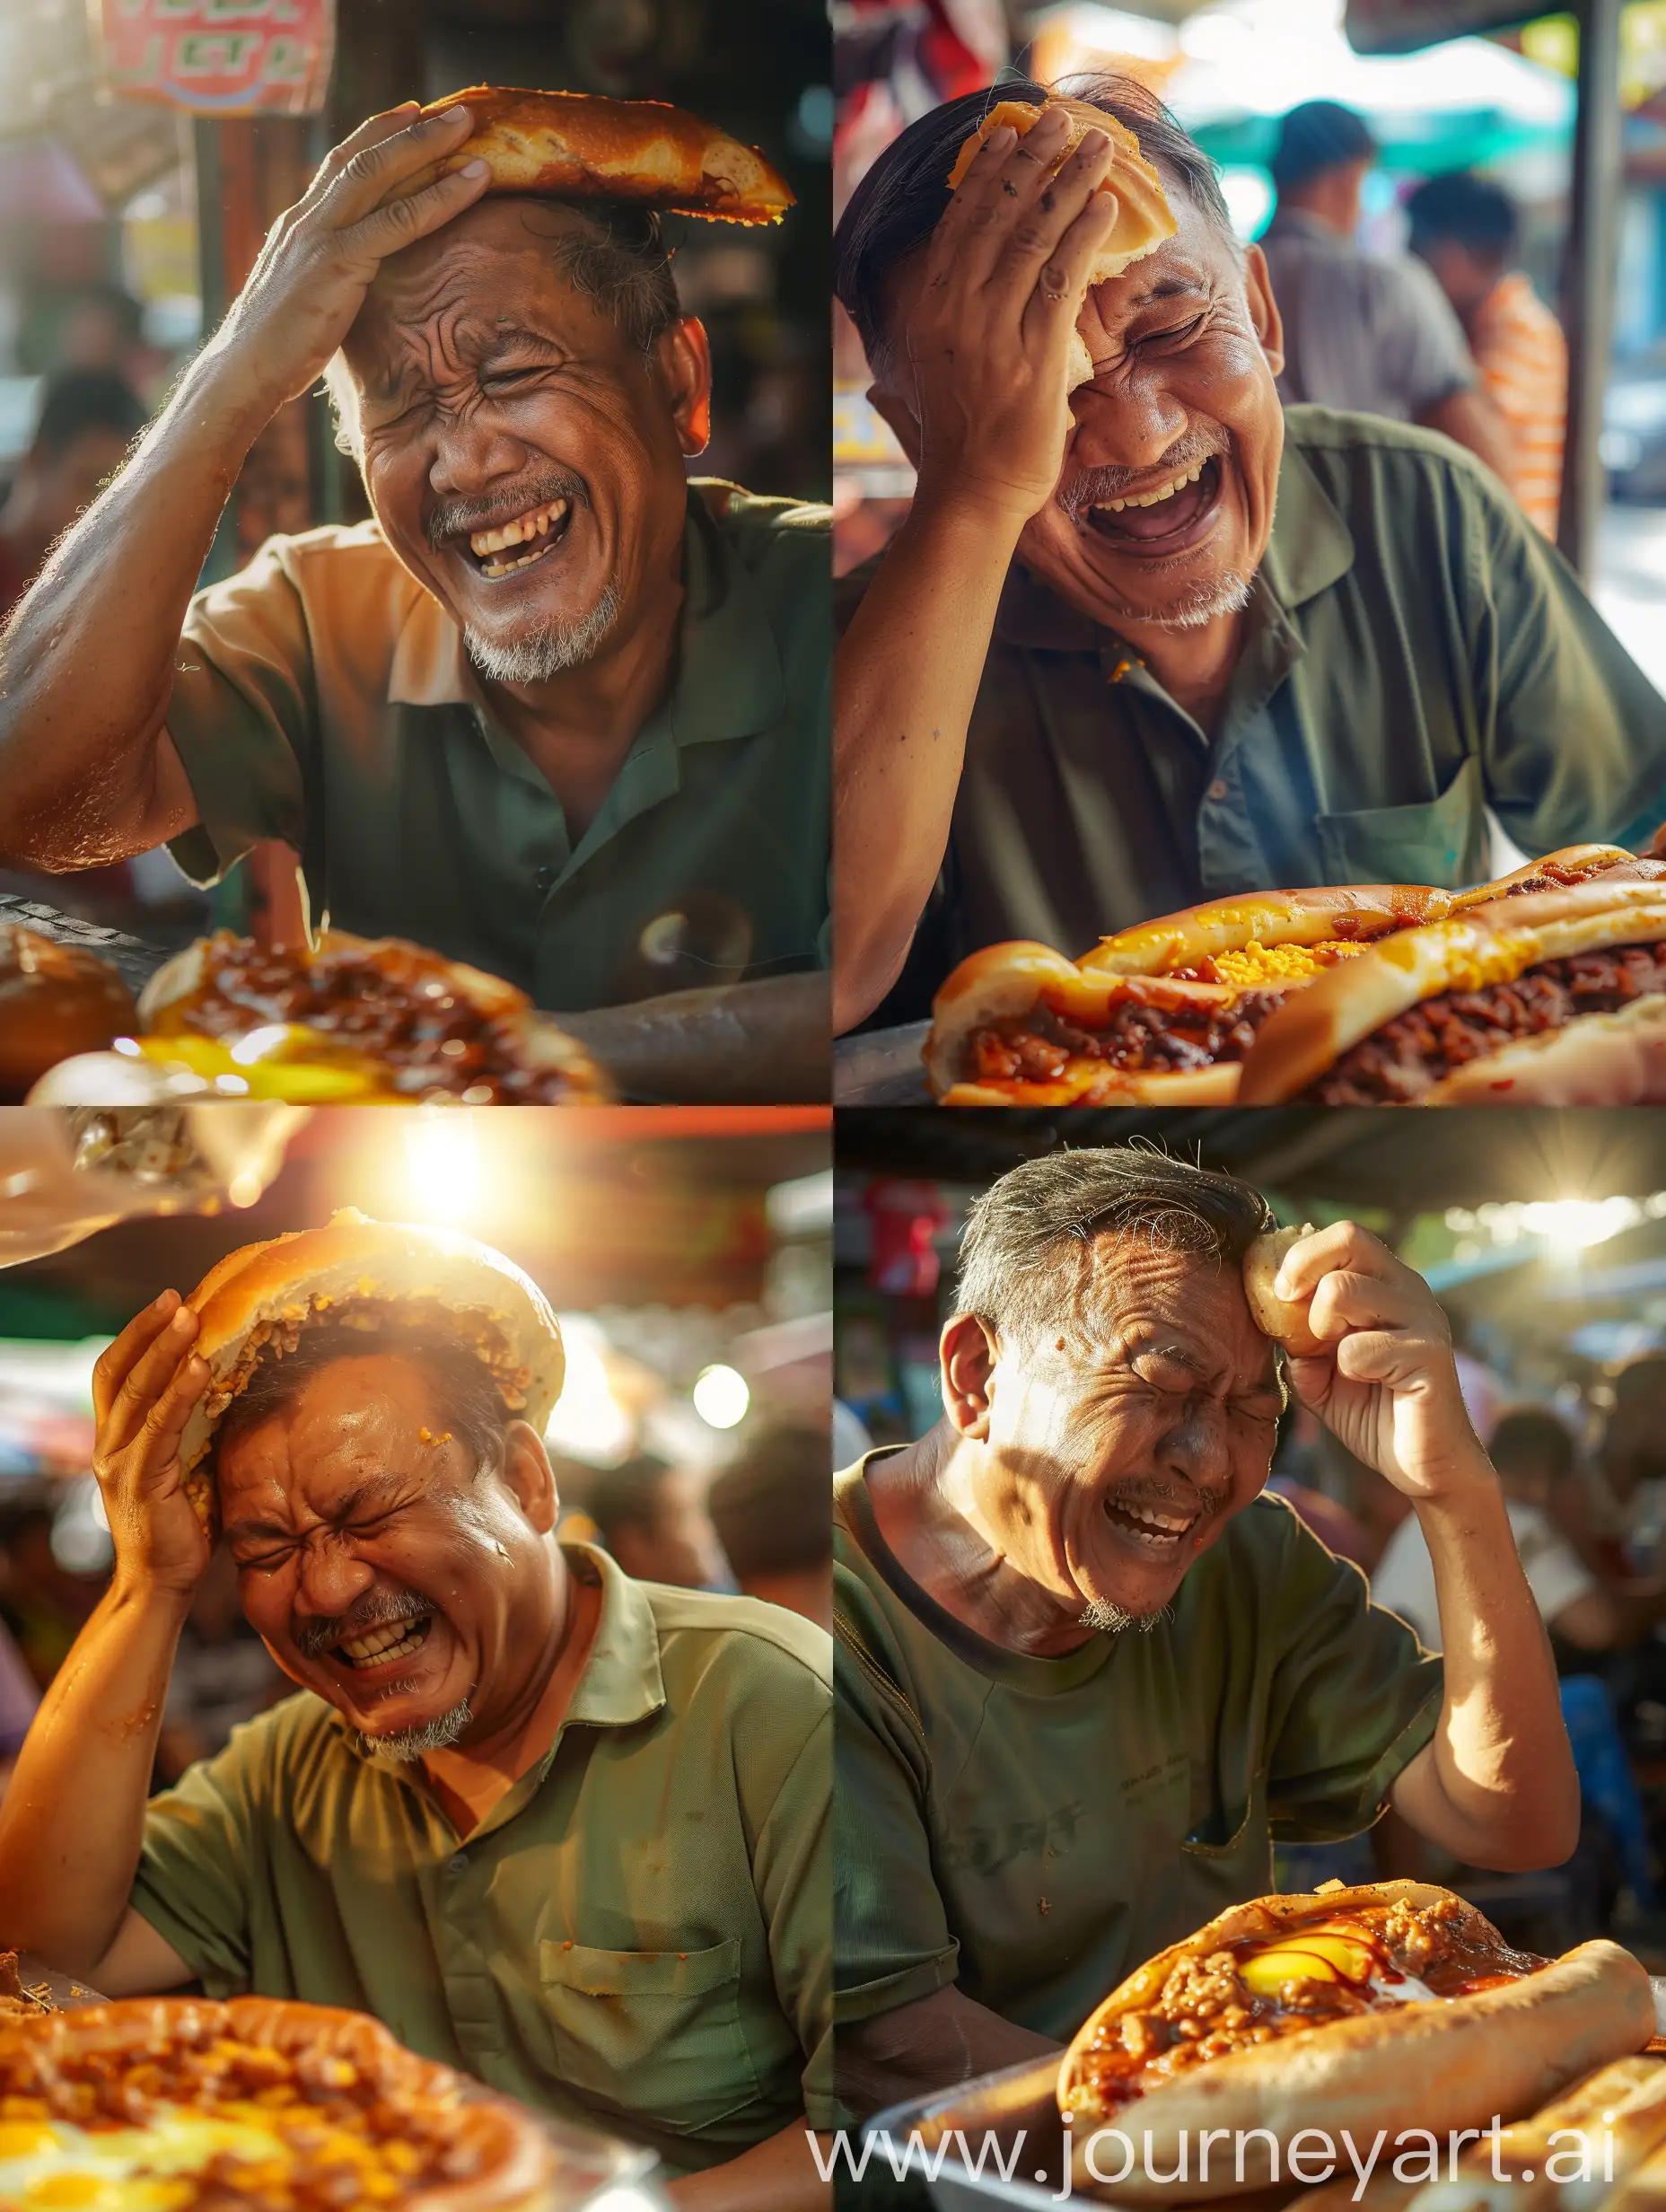 
a malay man was laughing while looking at the roti john he was holding. his left hand is scratching his head. long john bread has sauce and meat filling and egg inside. The man was wearing a songkok and a plain green Malay shirt. ramadan bazaar background, people buy food to break fast. atmosphere in the evening. there is sunlight. canon eos-id x mark iii dslr --v 6.0